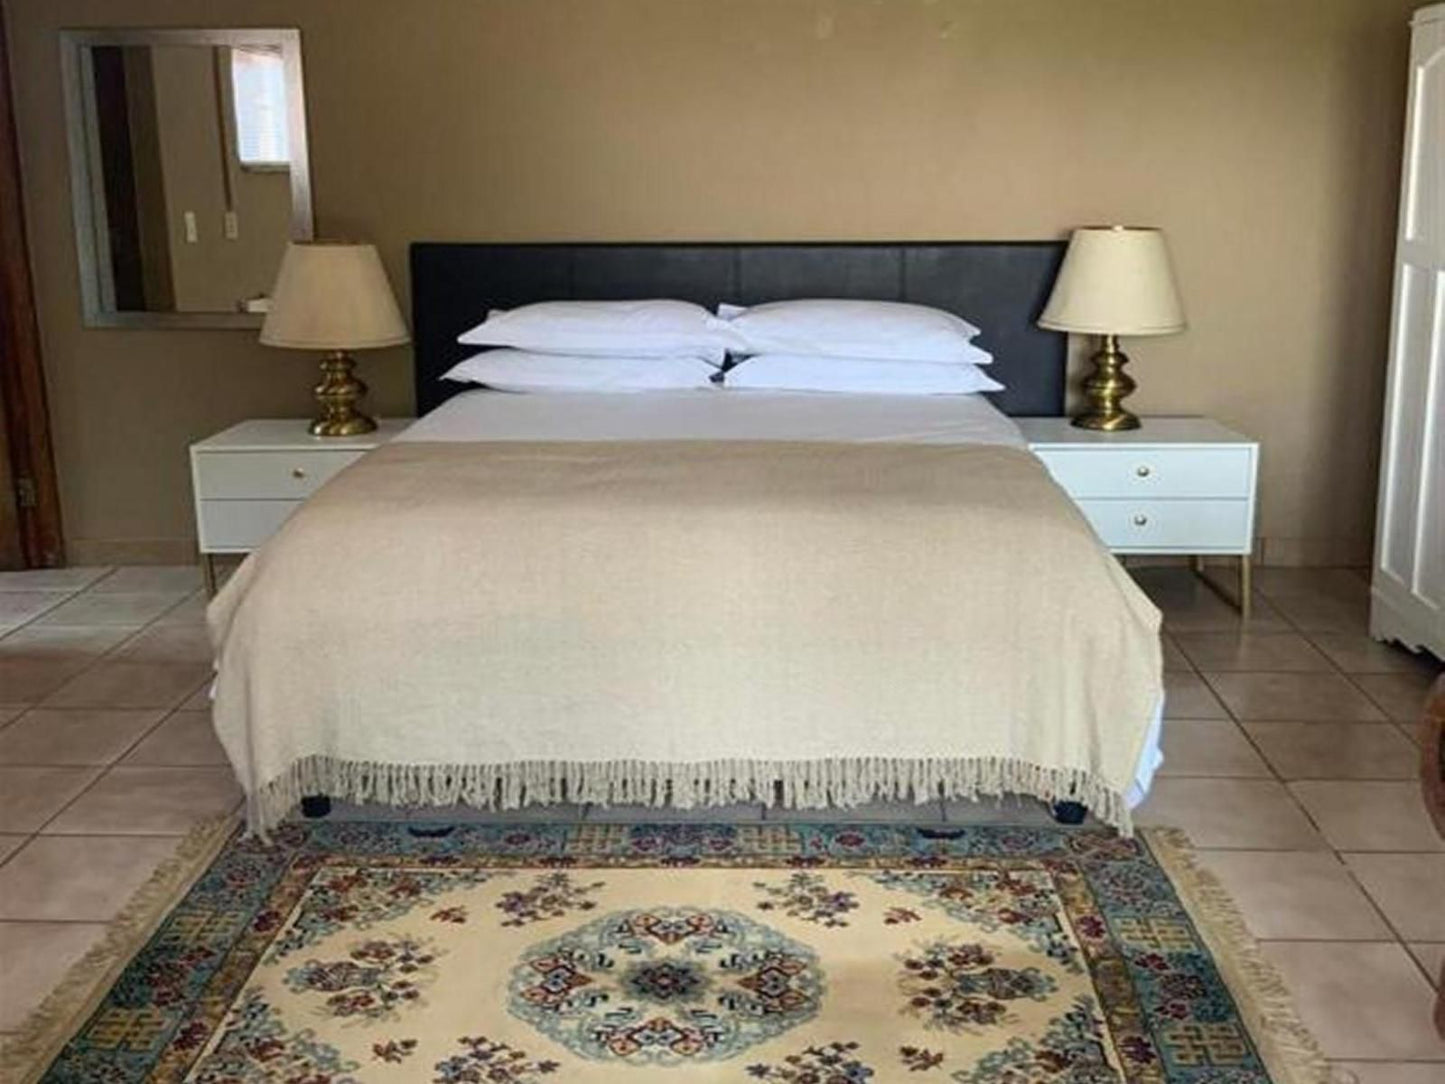 Marina Views Guesthouse Kosmos Hartbeespoort North West Province South Africa Bedroom